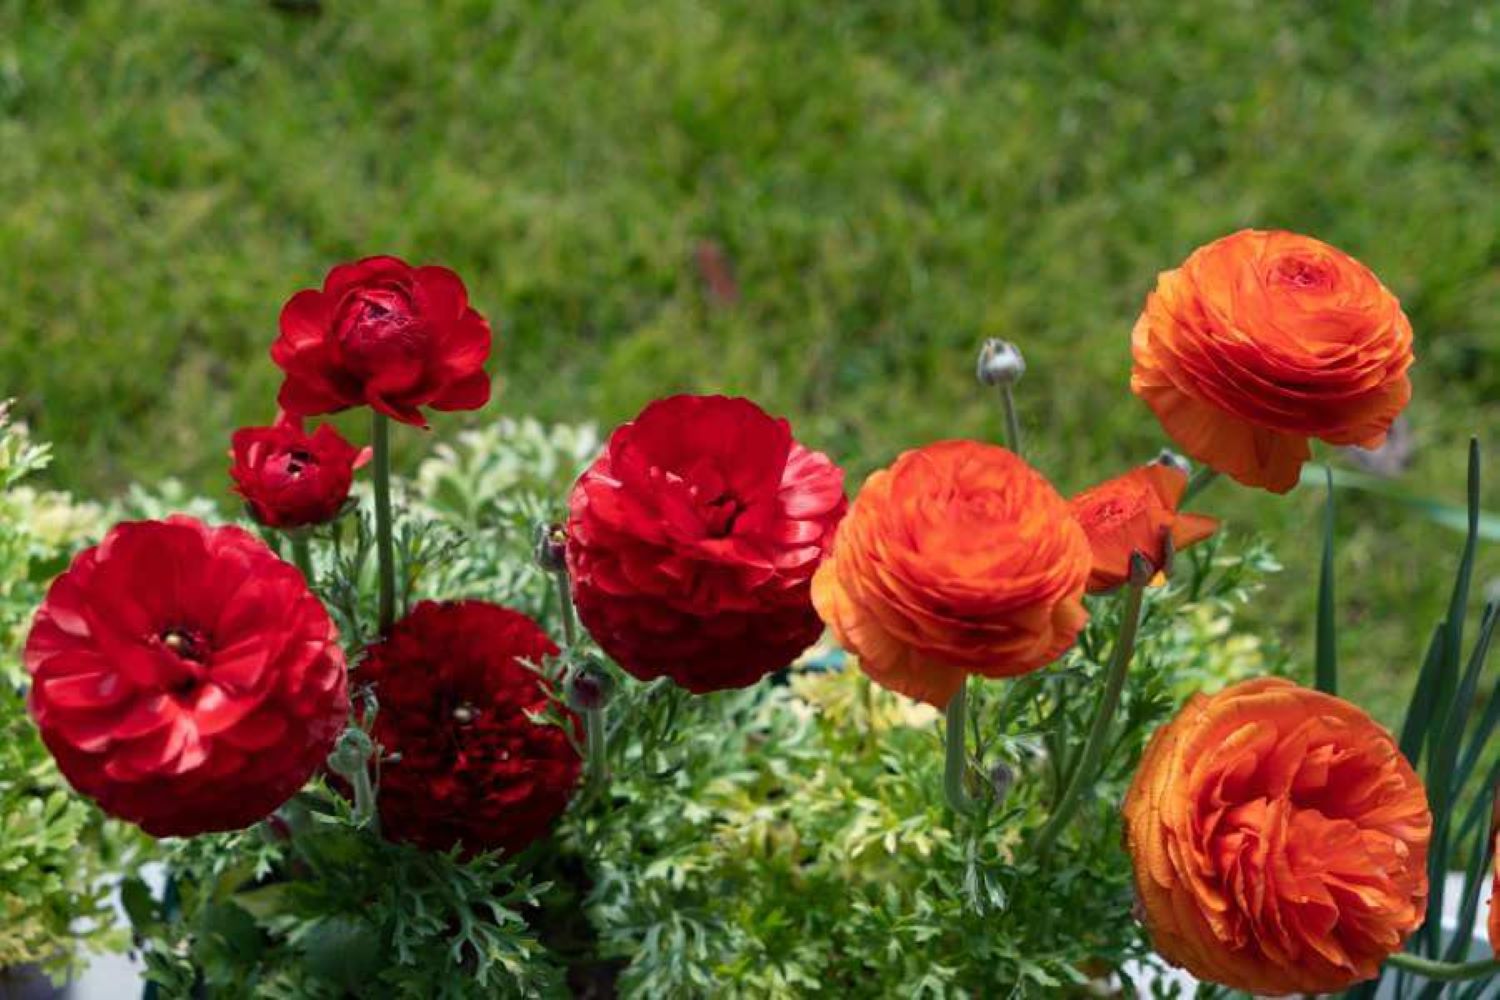 Red and orange flowers of the Persian buttercup